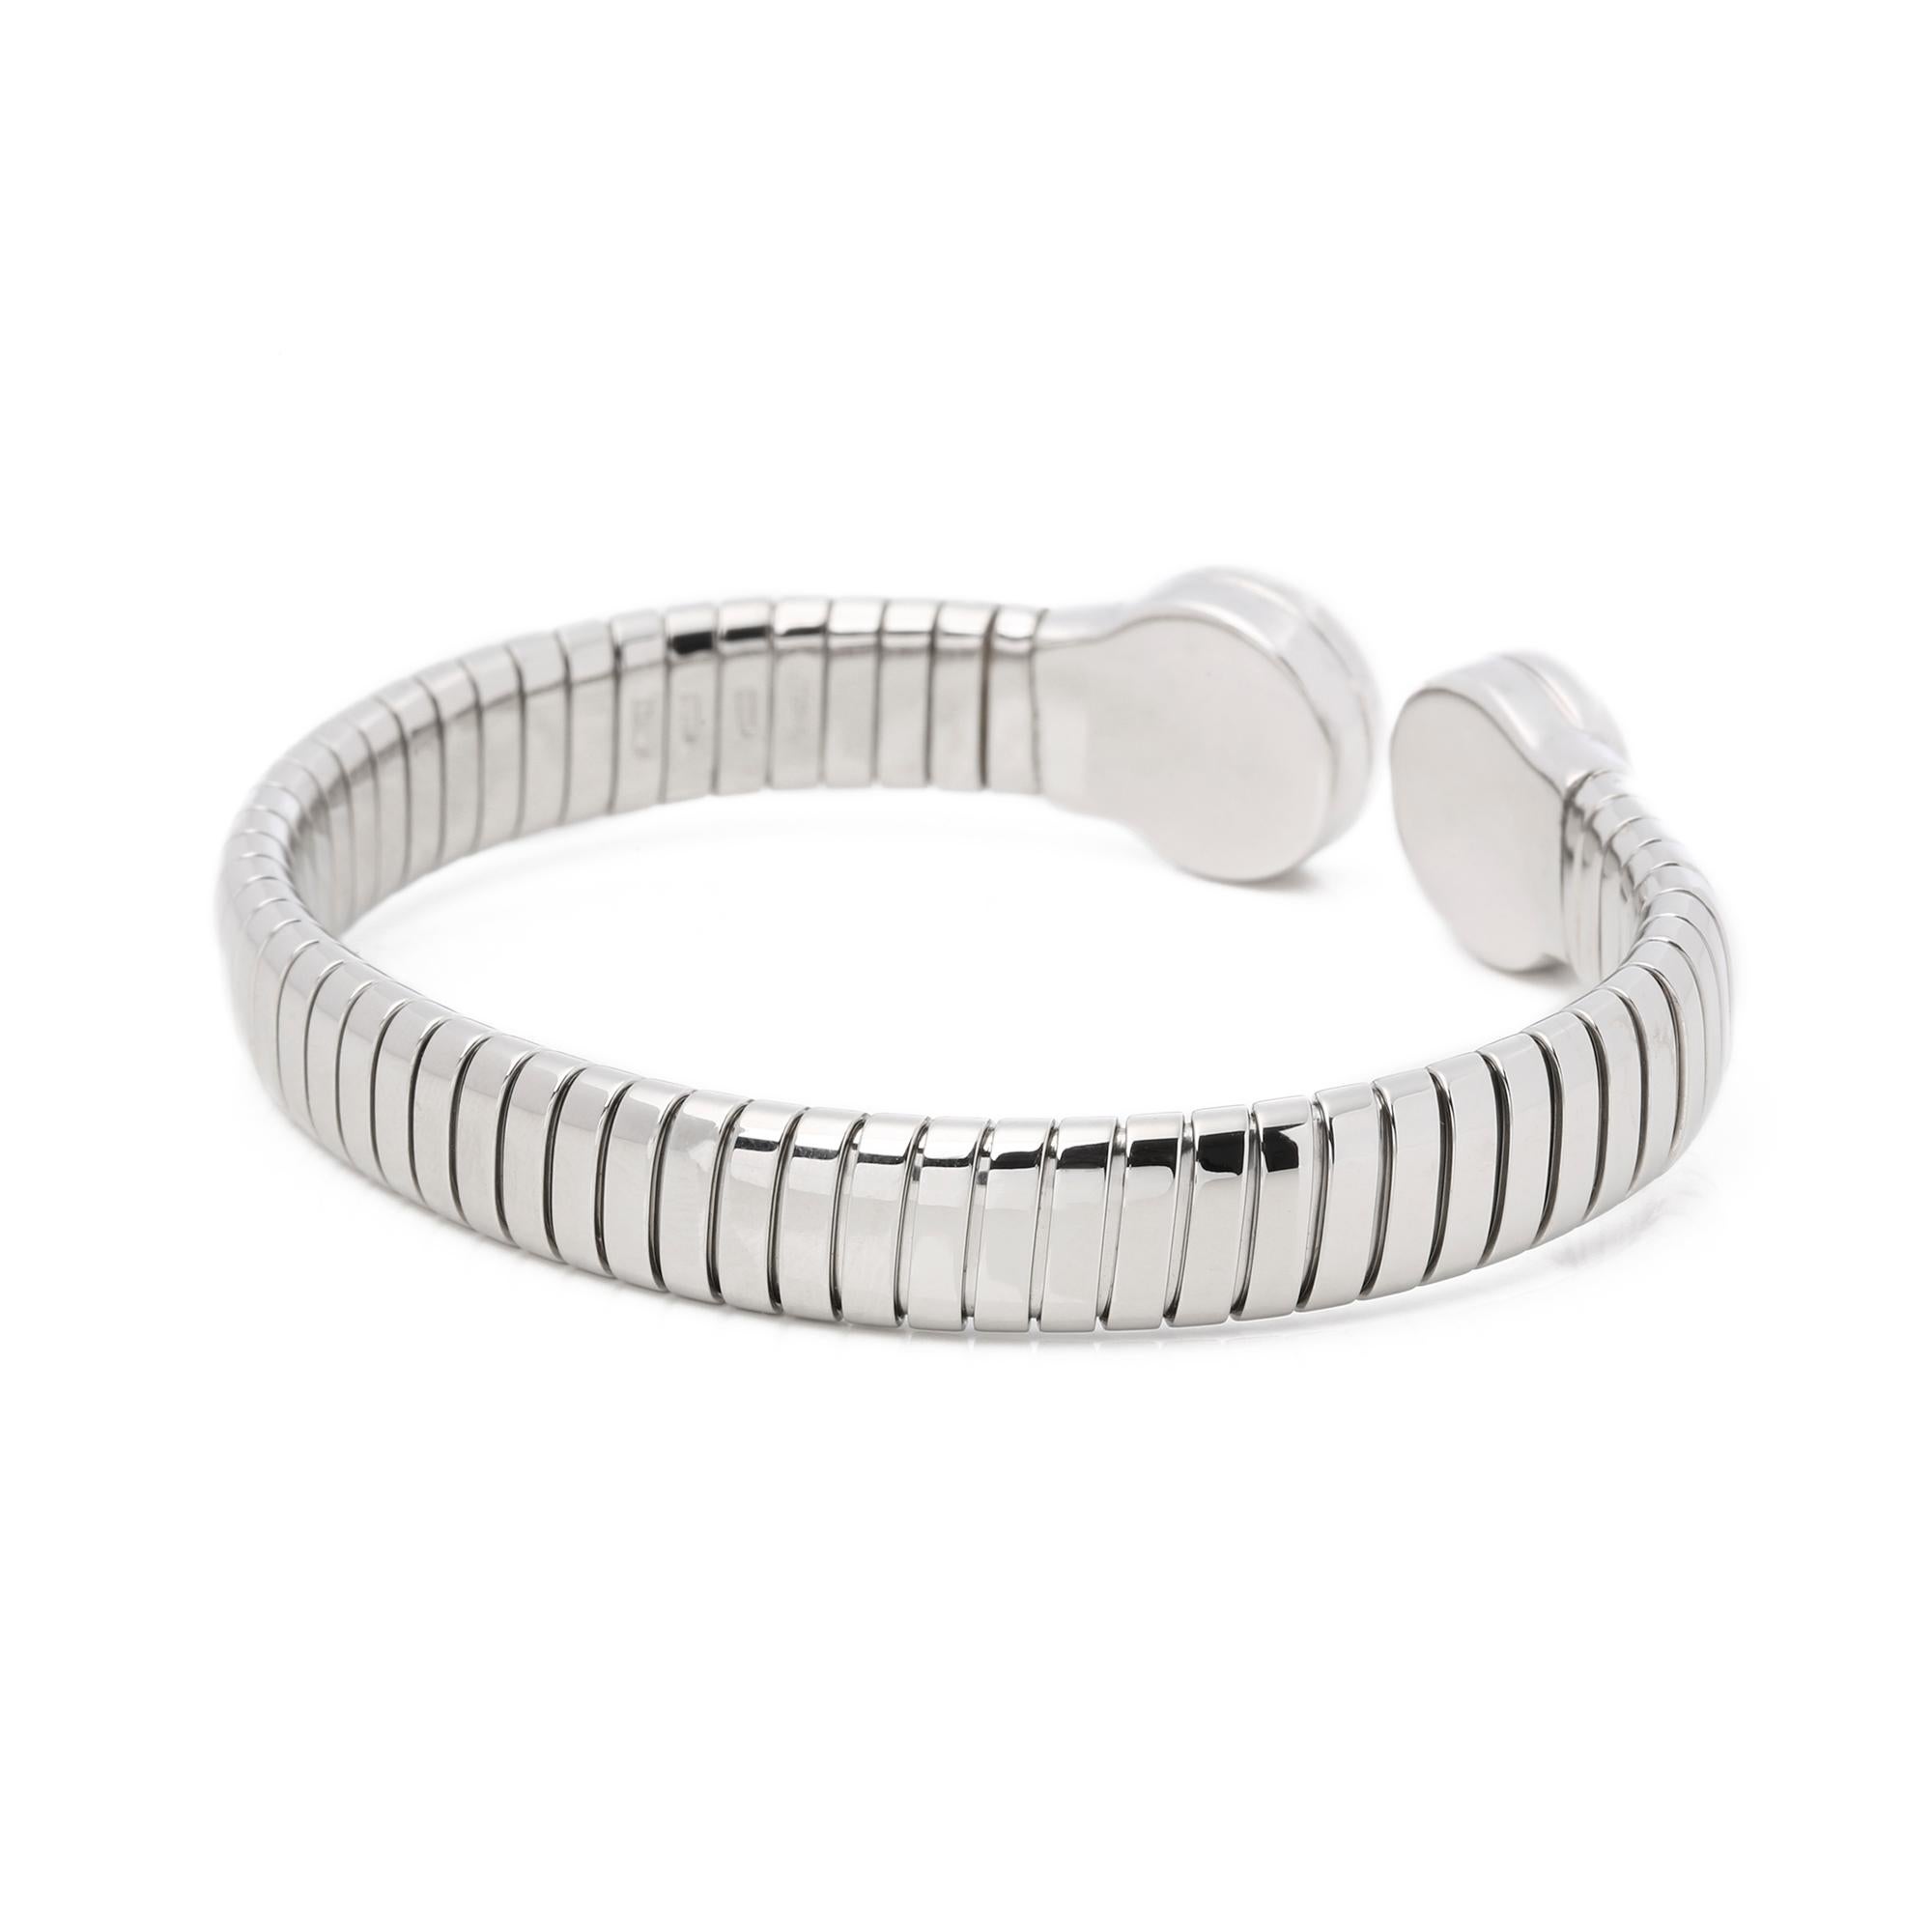 This bangle by Bulgari is from their Bulgari Bulgari collection and features round brilliant cut diamonds, set in stainless steel. Complete with Bulgari box. 